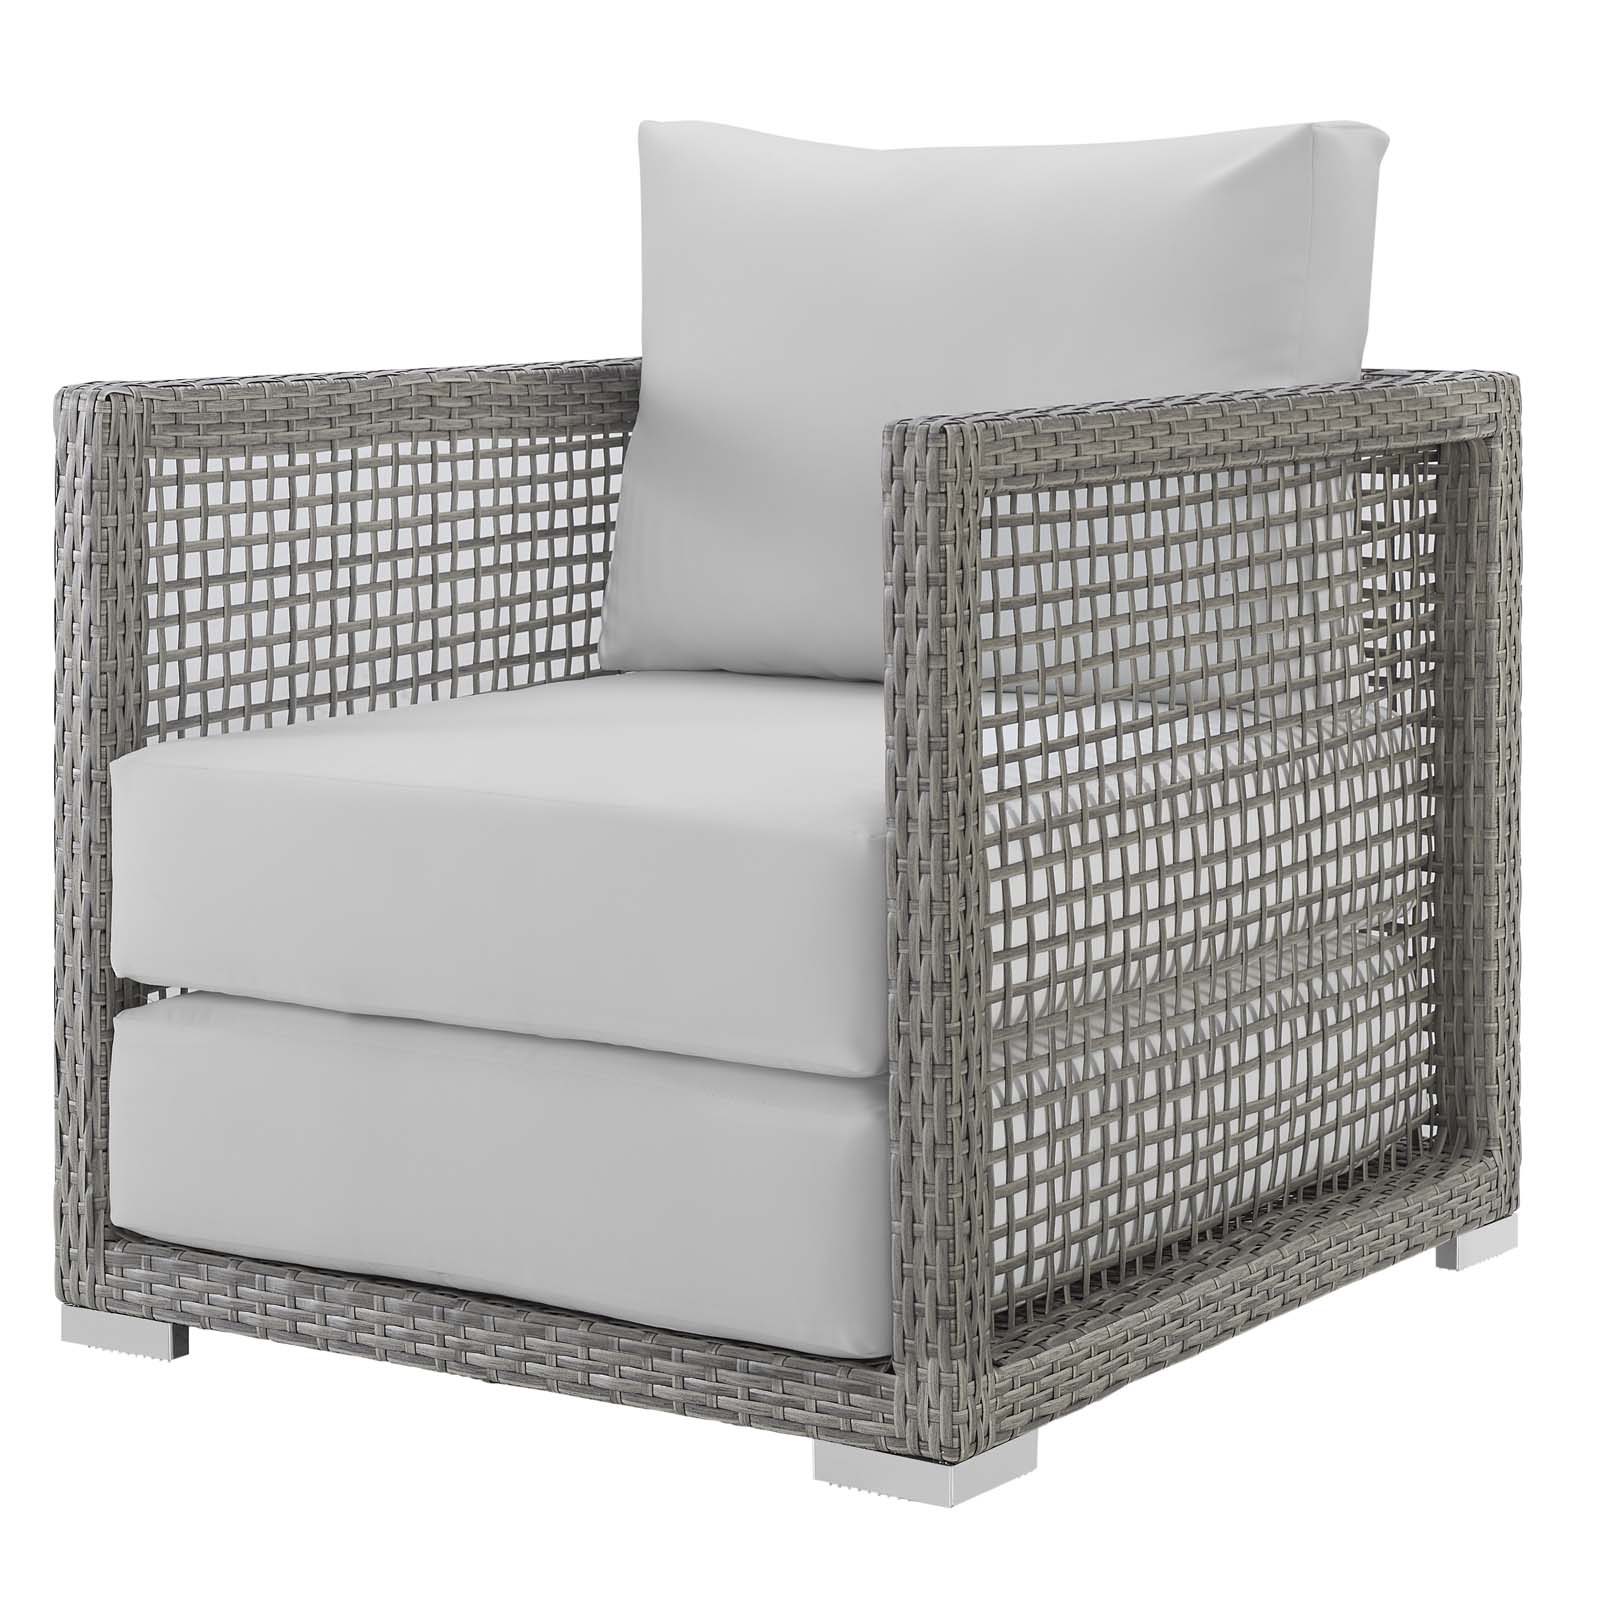 Contemporary Modern Urban Designer Outdoor Patio Balcony Garden Furniture Lounge Chair and Coffee Side Table Set, Rattan Wicker Fabric, Grey Gray White - image 5 of 8